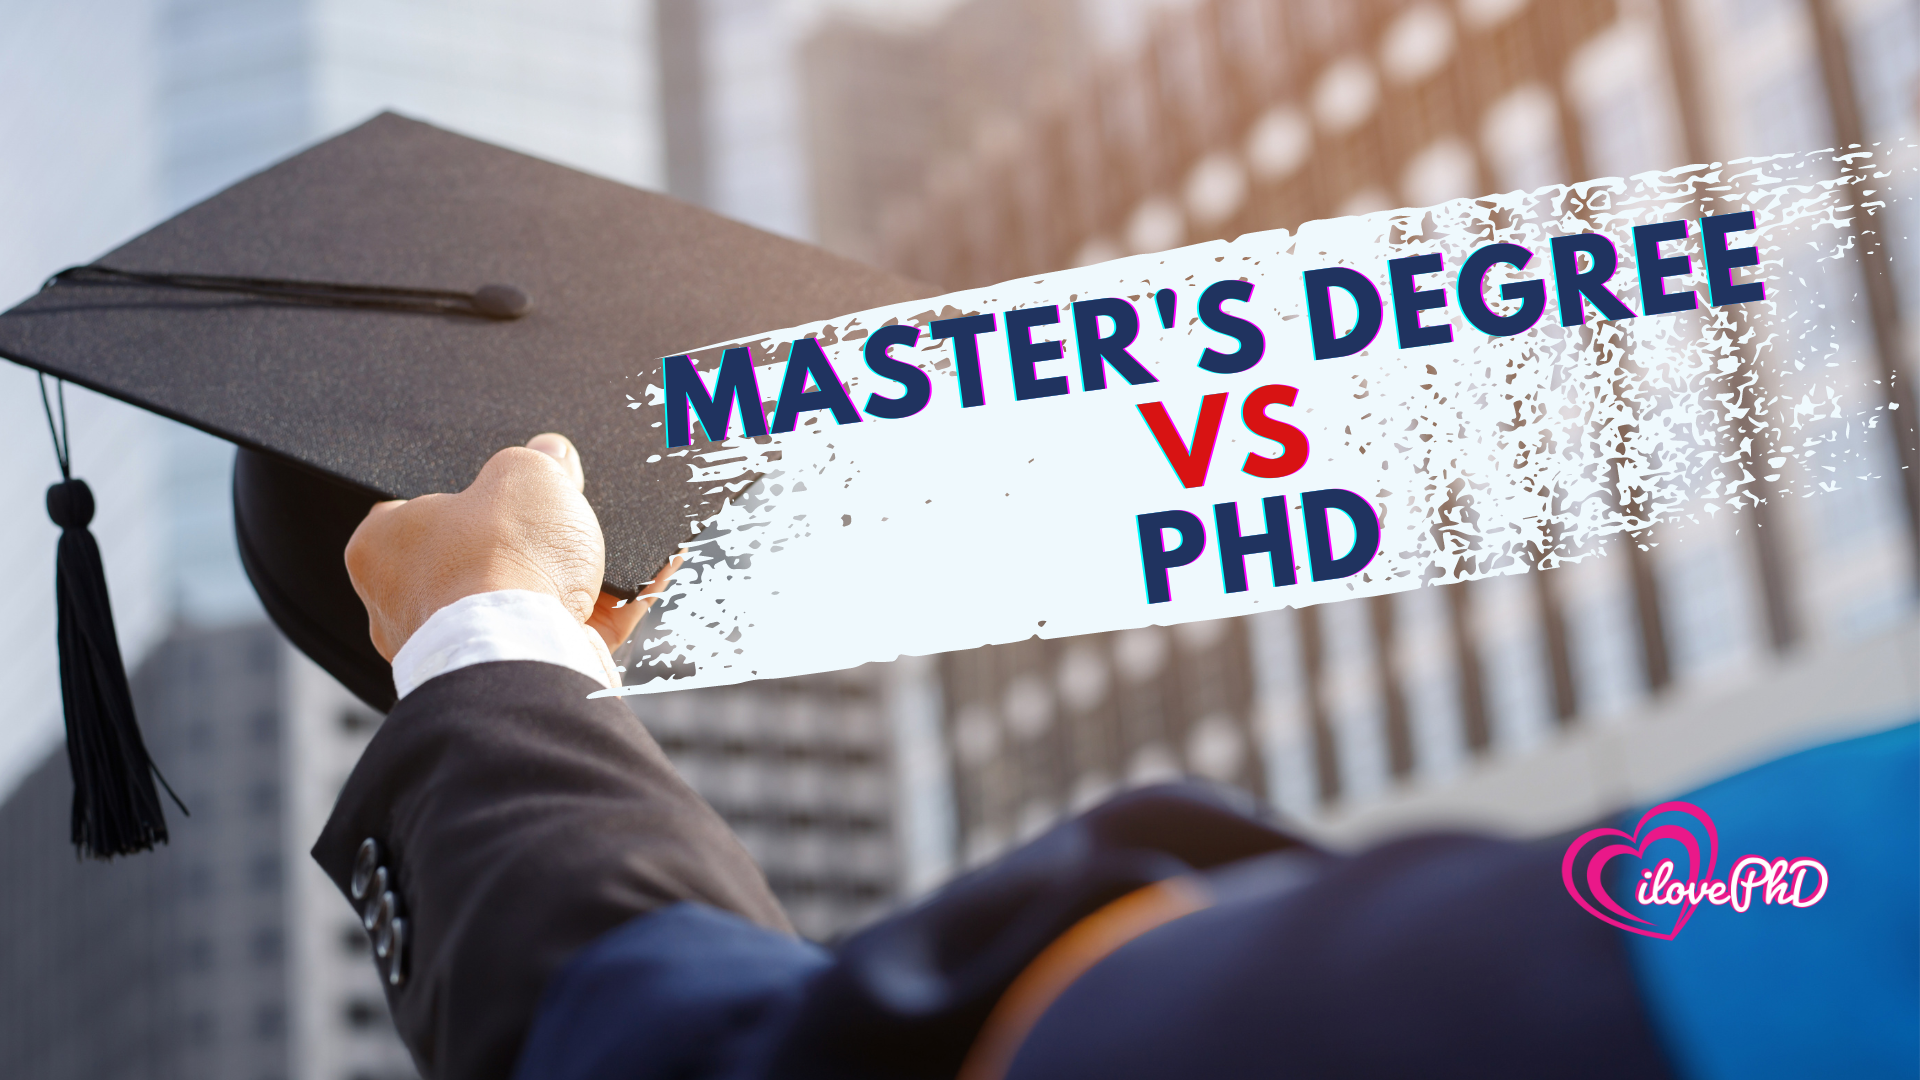 is master's degree and phd the same